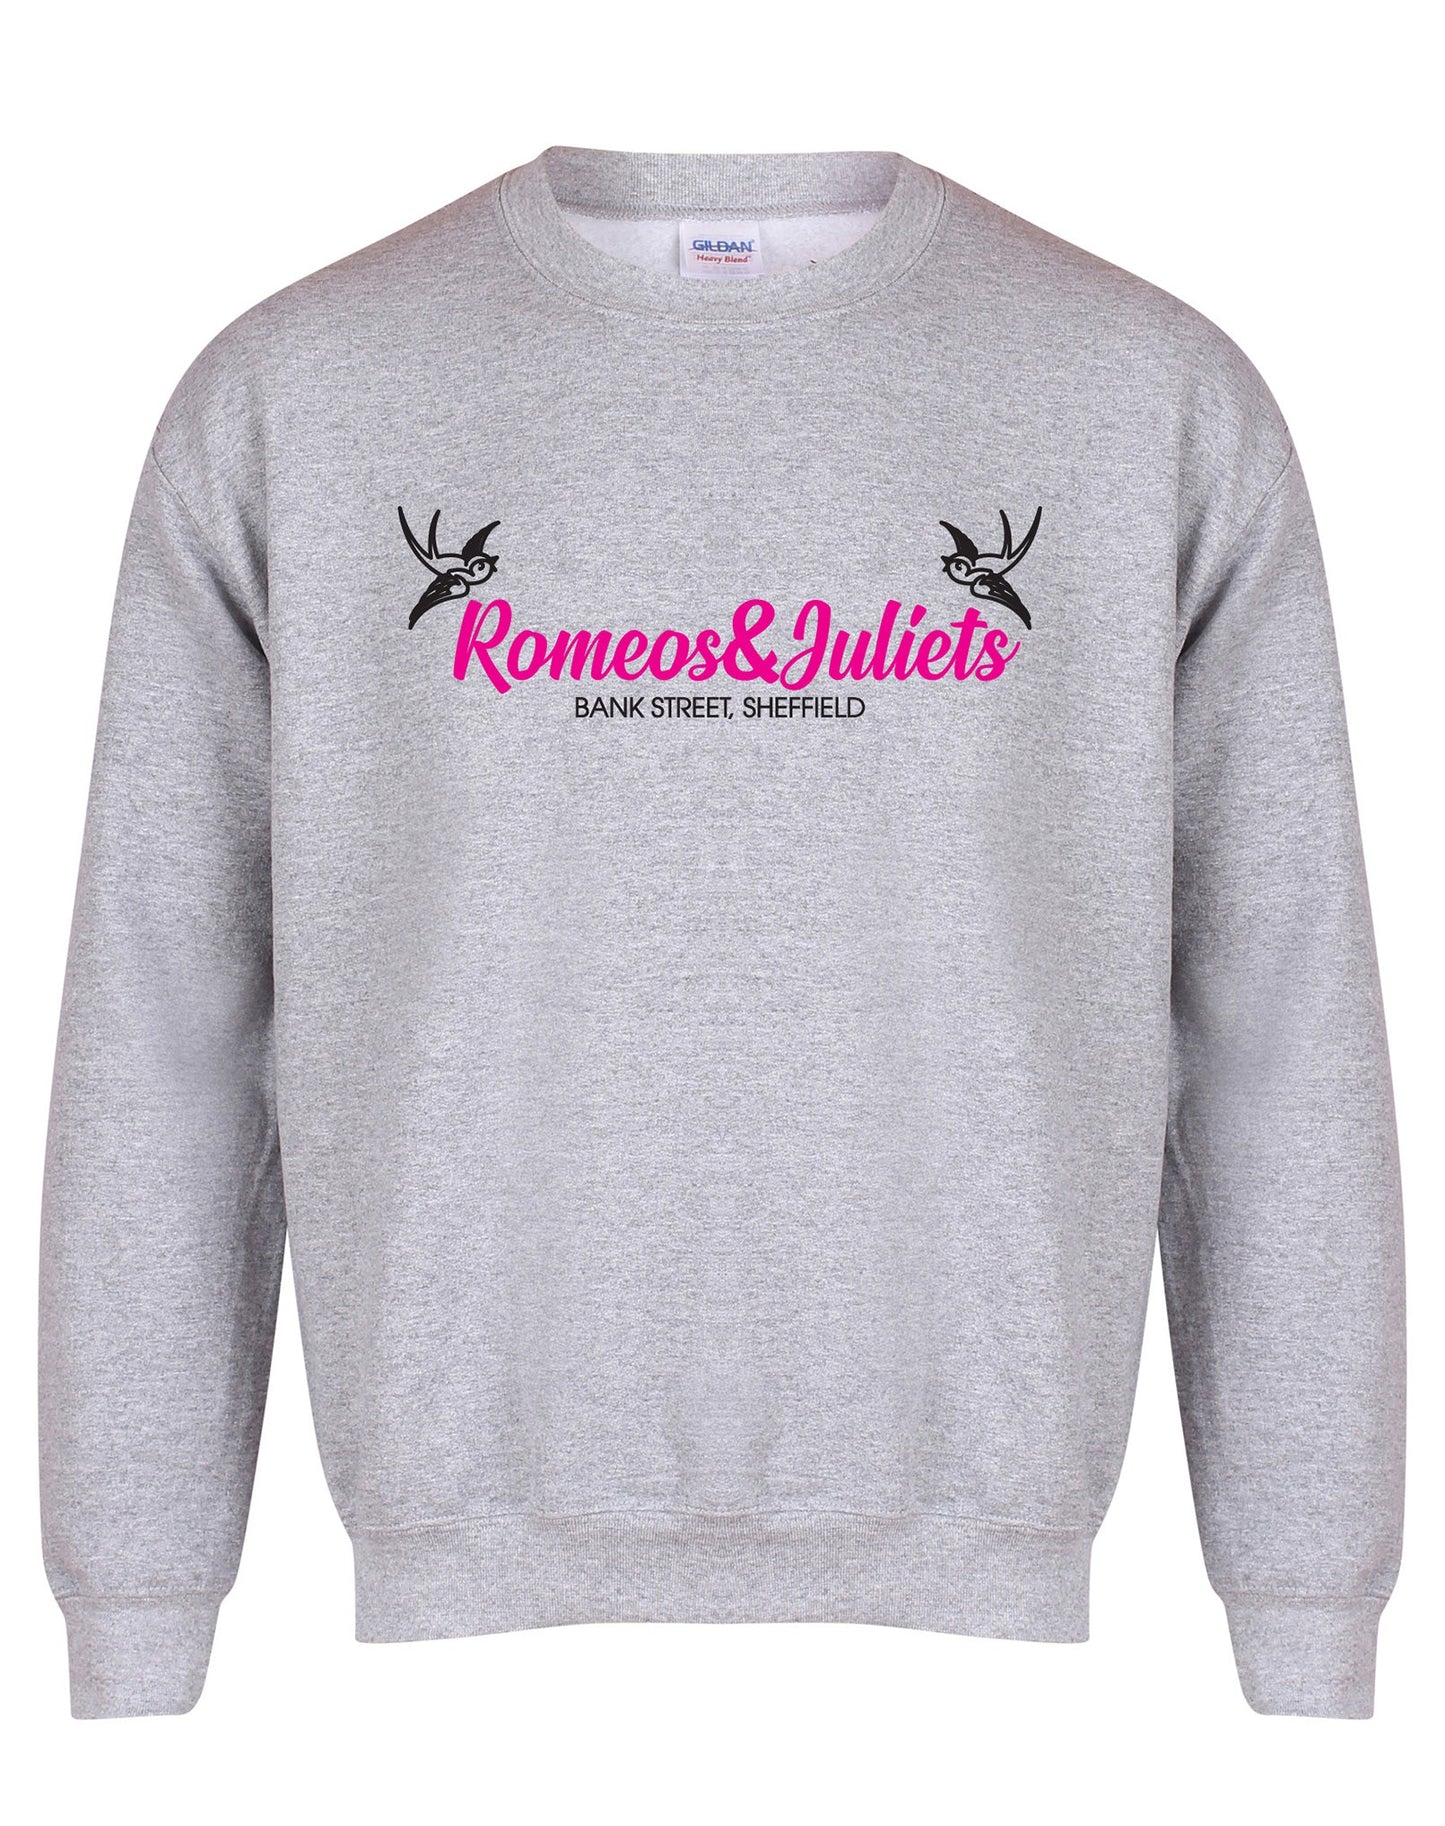 Romeos & Juliets unisex fit sweatshirt - various colours - Dirty Stop Outs